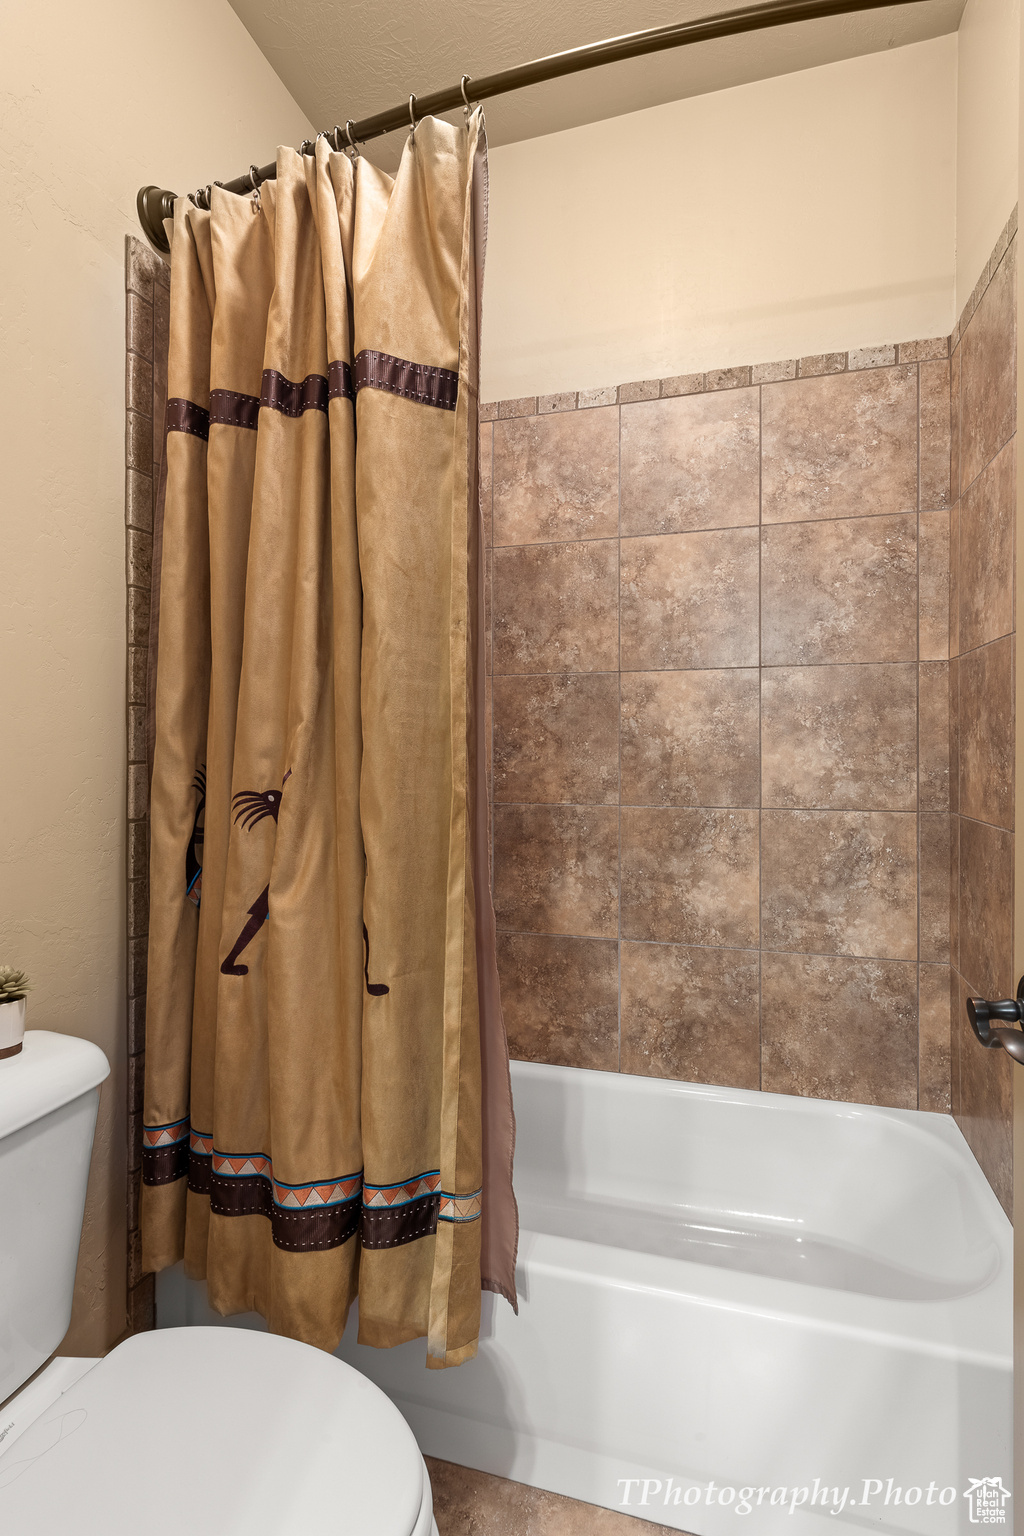 33-Tub/Shower With Tile Accent Surround